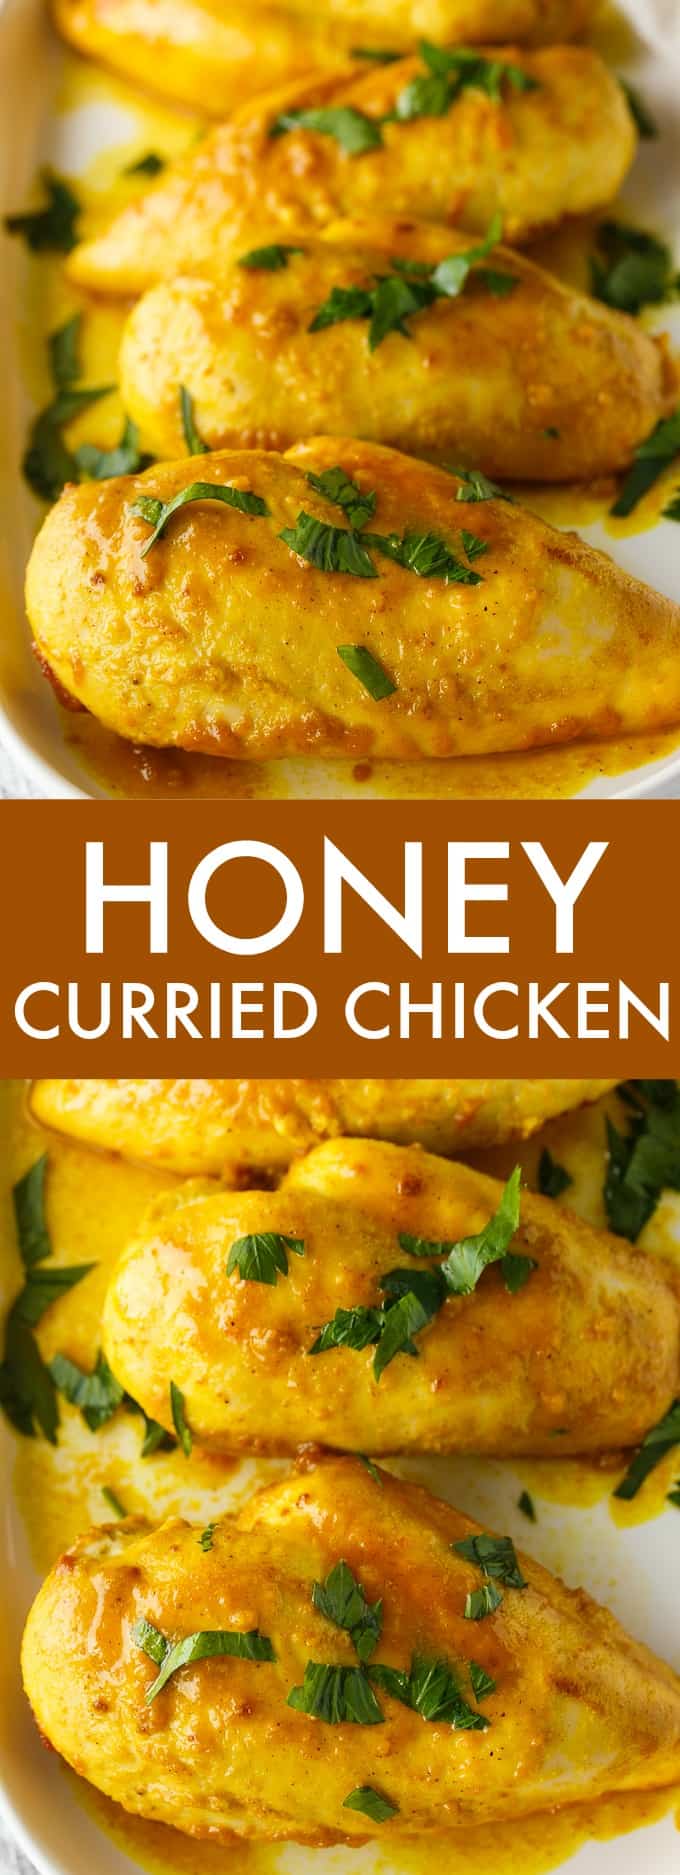 Honey Curried Chicken - The best vintage dinner recipe! Dress up your chicken breasts in a sweet and savory curry sauce with a little kick.